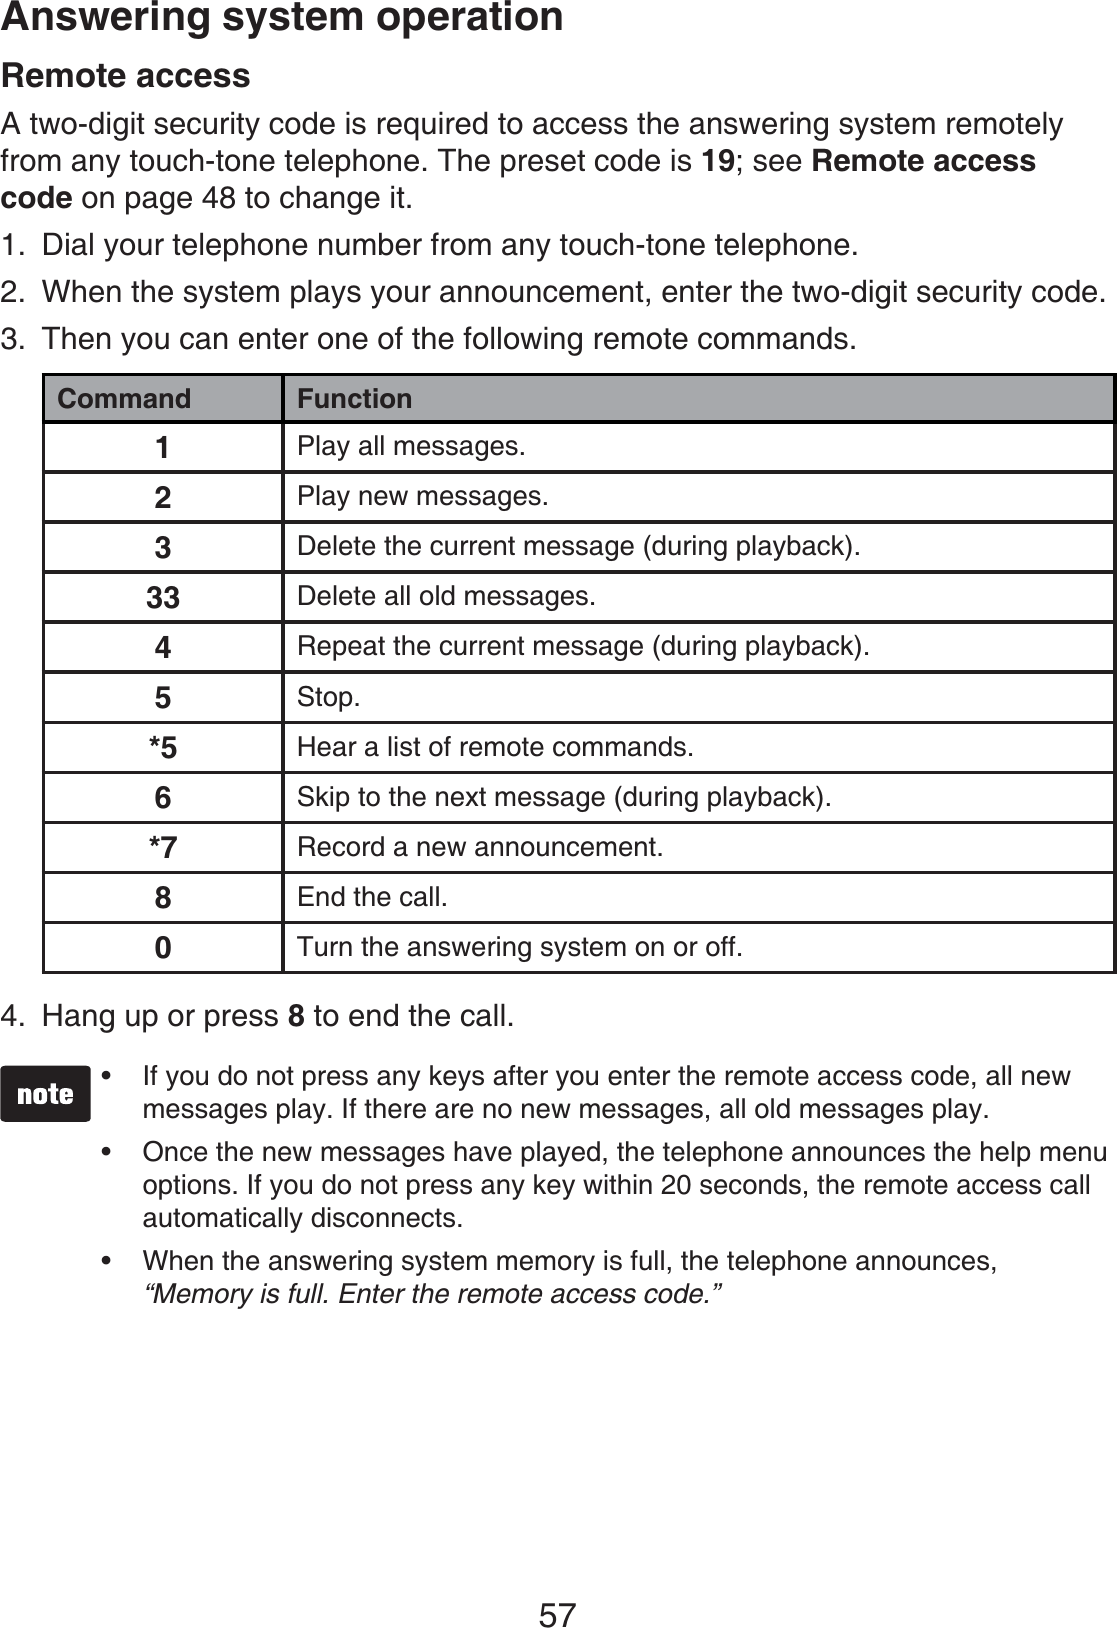 57Answering system operationRemote accessA two-digit security code is required to access the answering system remotely from any touch-tone telephone. The preset code is 19; see Remote access code on page 48 to change it.Dial your telephone number from any touch-tone telephone.When the system plays your announcement, enter the two-digit security code.Then you can enter one of the following remote commands.Command Function1Play all messages.2Play new messages.3Delete the current message (during playback).33 Delete all old messages.4Repeat the current message (during playback).5Stop.*5 Hear a list of remote commands.6Skip to the next message (during playback).*7 Record a new announcement.8End the call.0Turn the answering system on or off.Hang up or press 8 to end the call.If you do not press any keys after you enter the remote access code, all new messages play. If there are no new messages, all old messages play.Once the new messages have played, the telephone announces the help menu options. If you do not press any key within 20 seconds, the remote access call automatically disconnects.When the answering system memory is full, the telephone announces, “Memory is full. Enter the remote access code.”•••1.2.3.4.